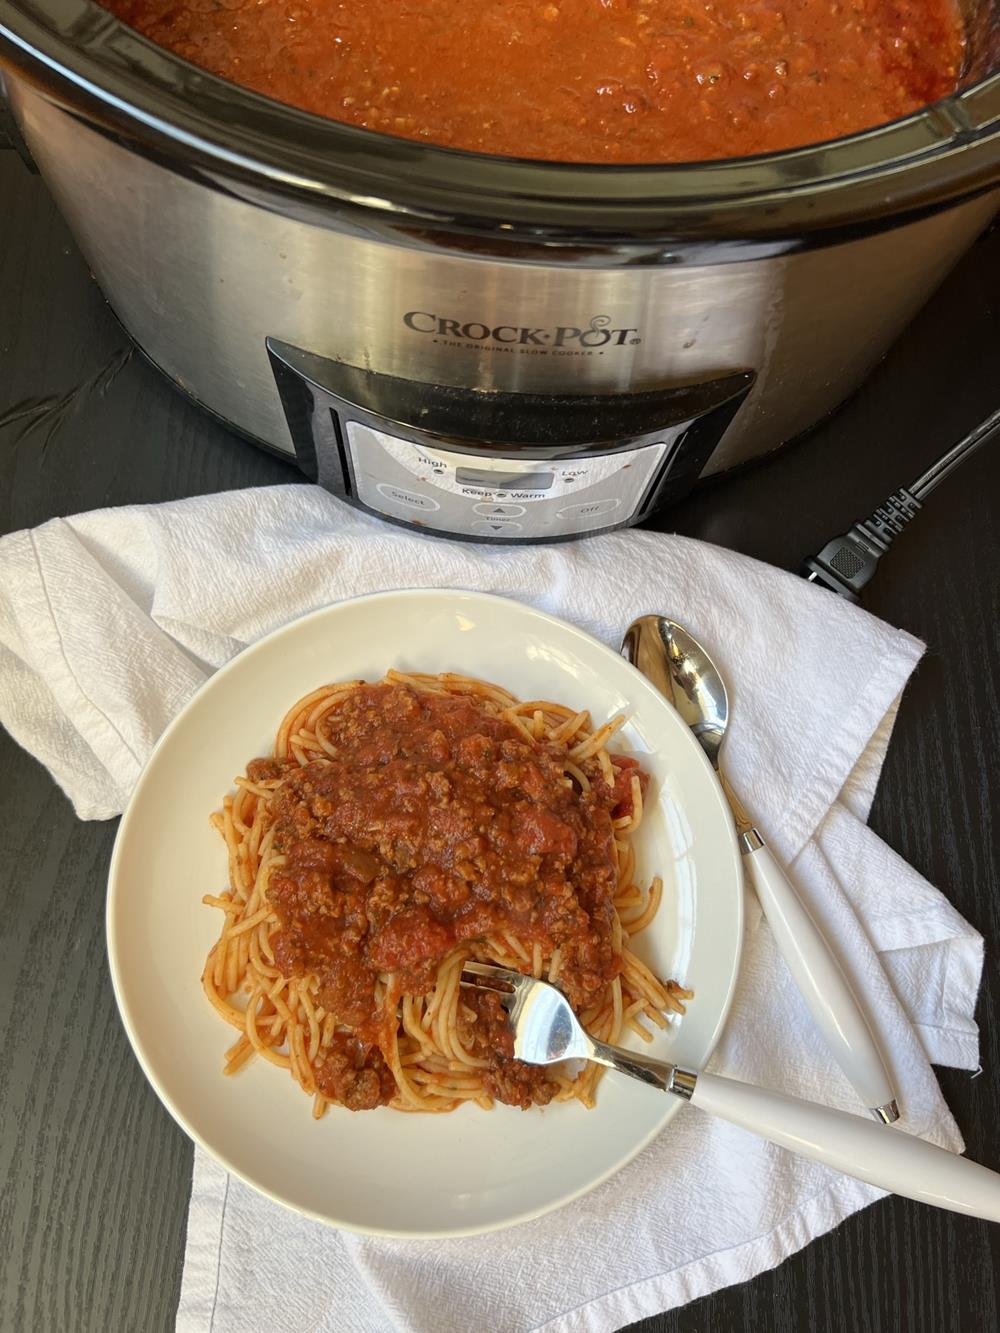 Crock Pot Spaghetti Sauce and pasta on white plate with crock pot in background